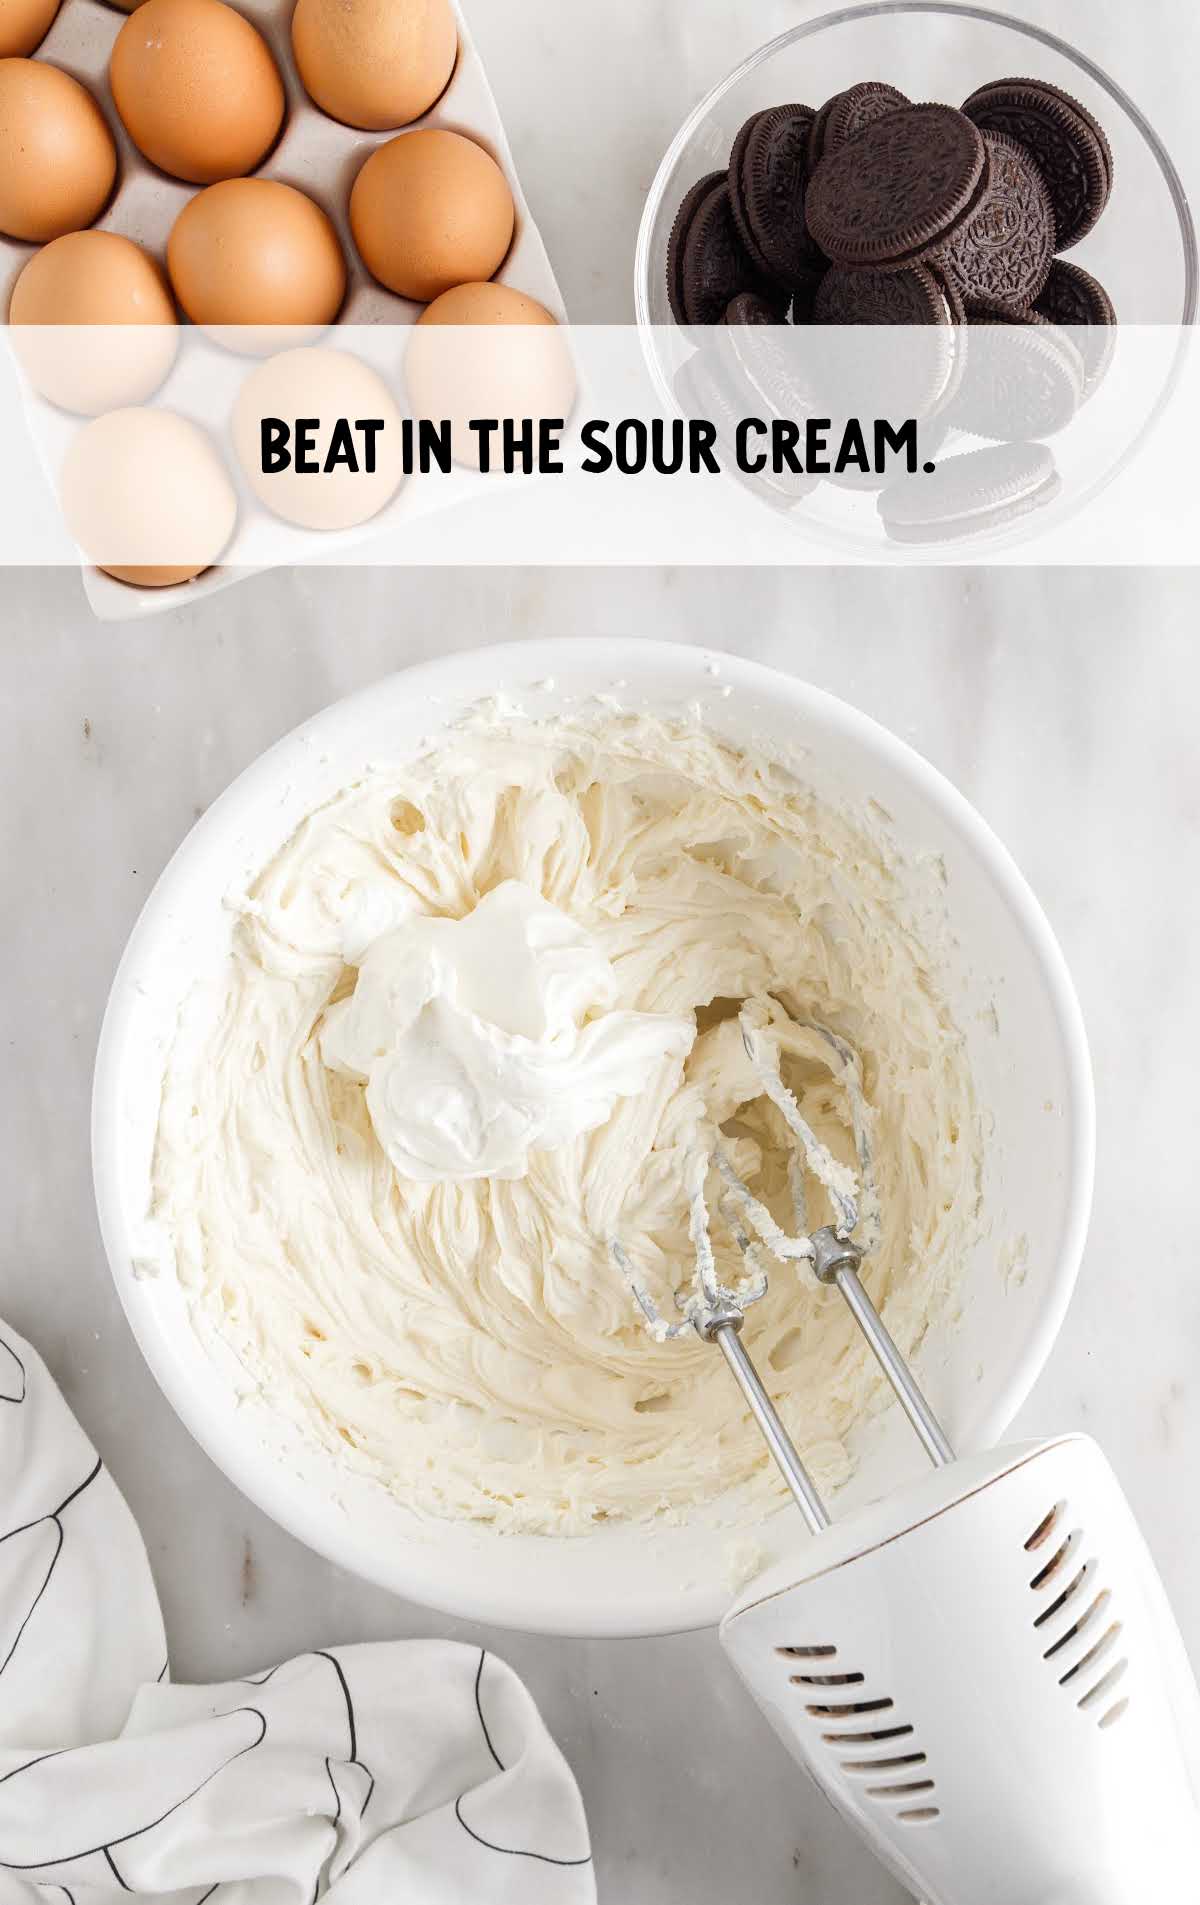 sour cream beat into the cream cheese mixture in the bowl